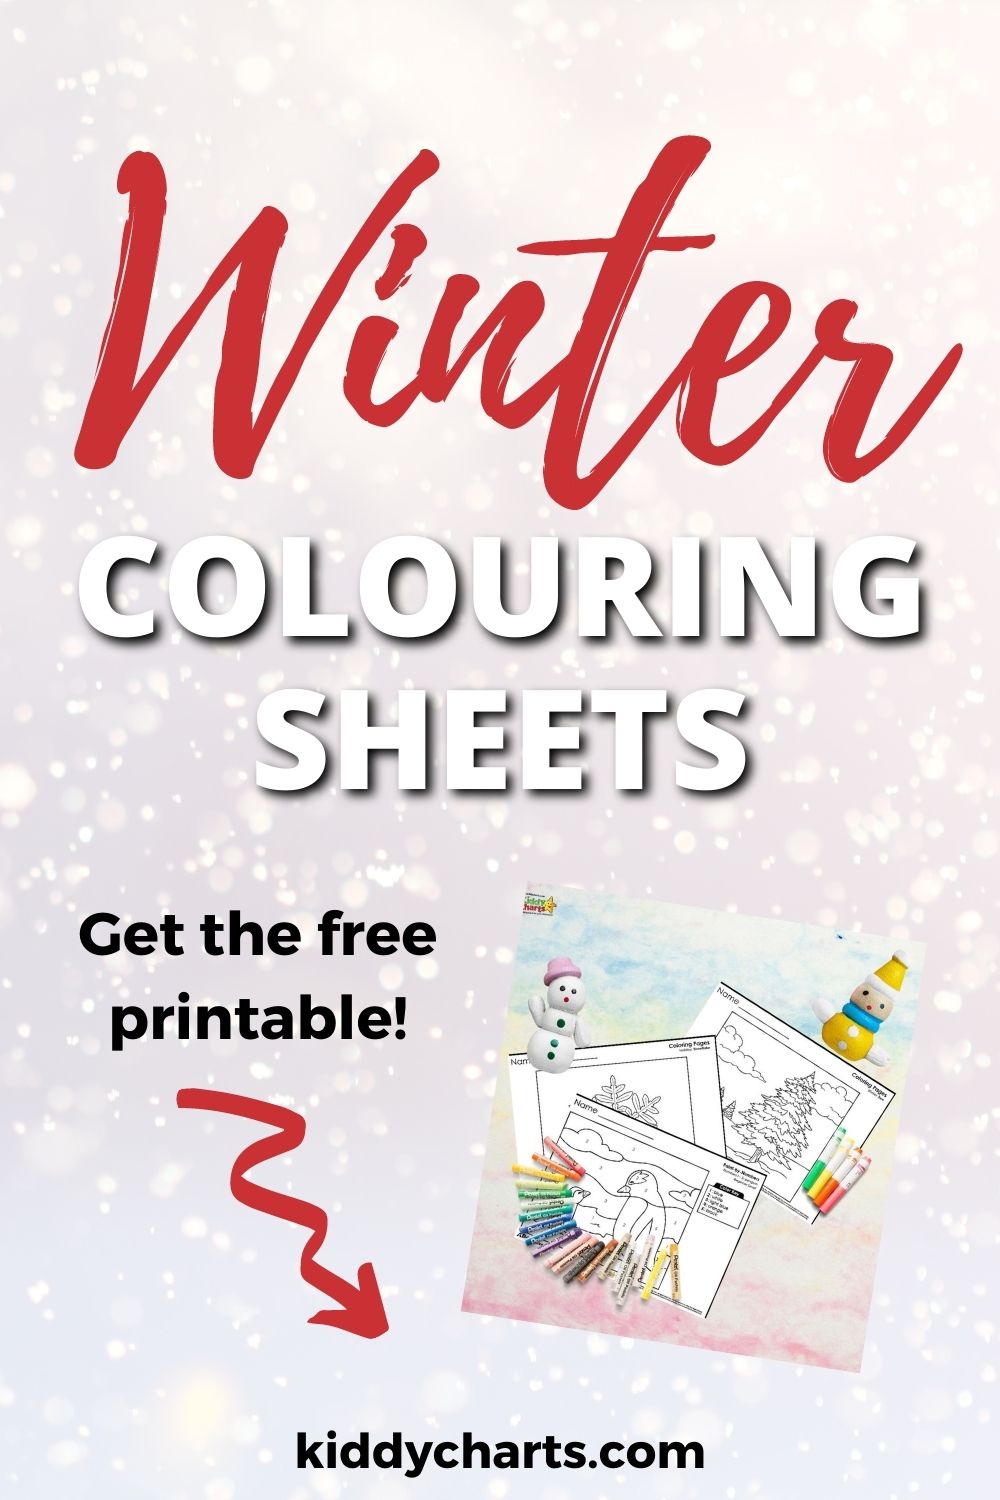 Winter Coloring Pages for Kids - Winter Scenes - kiddycharts.com